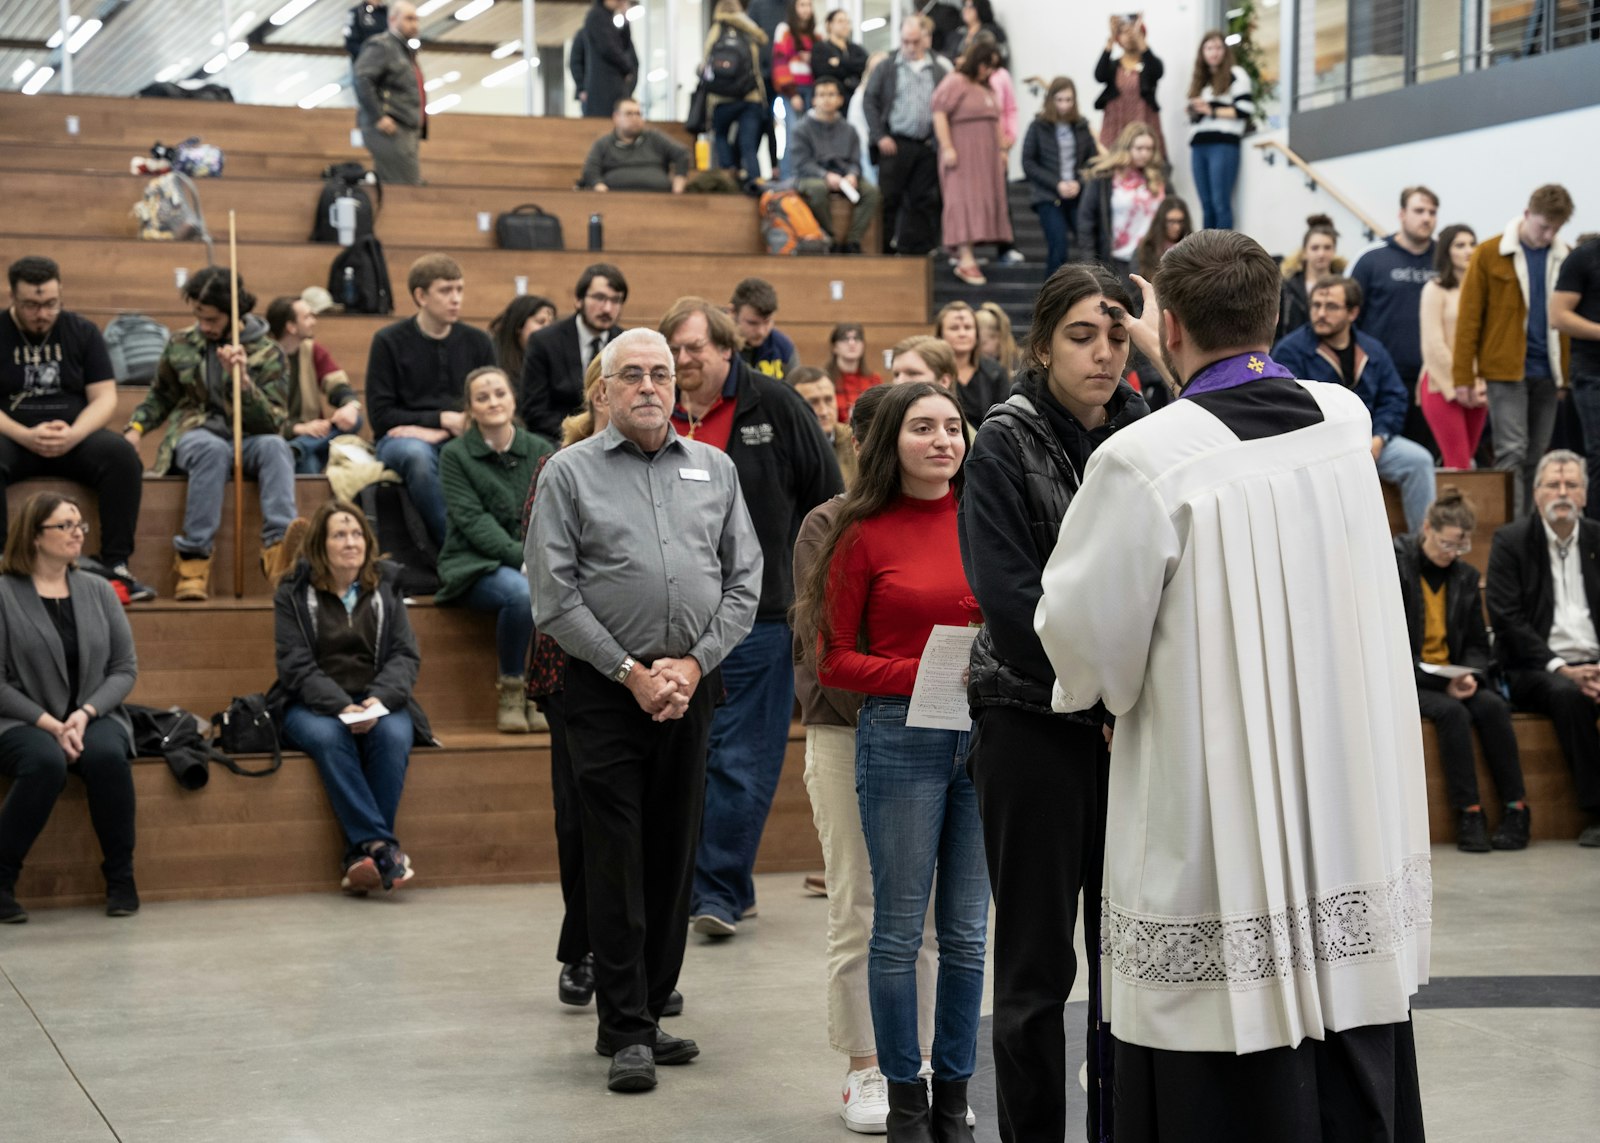 The Ash Wednesday event is typically held at the parish, which serves as the home base for the university’s Catholic campus ministry, but this year took place on the Oakland University campus itself.